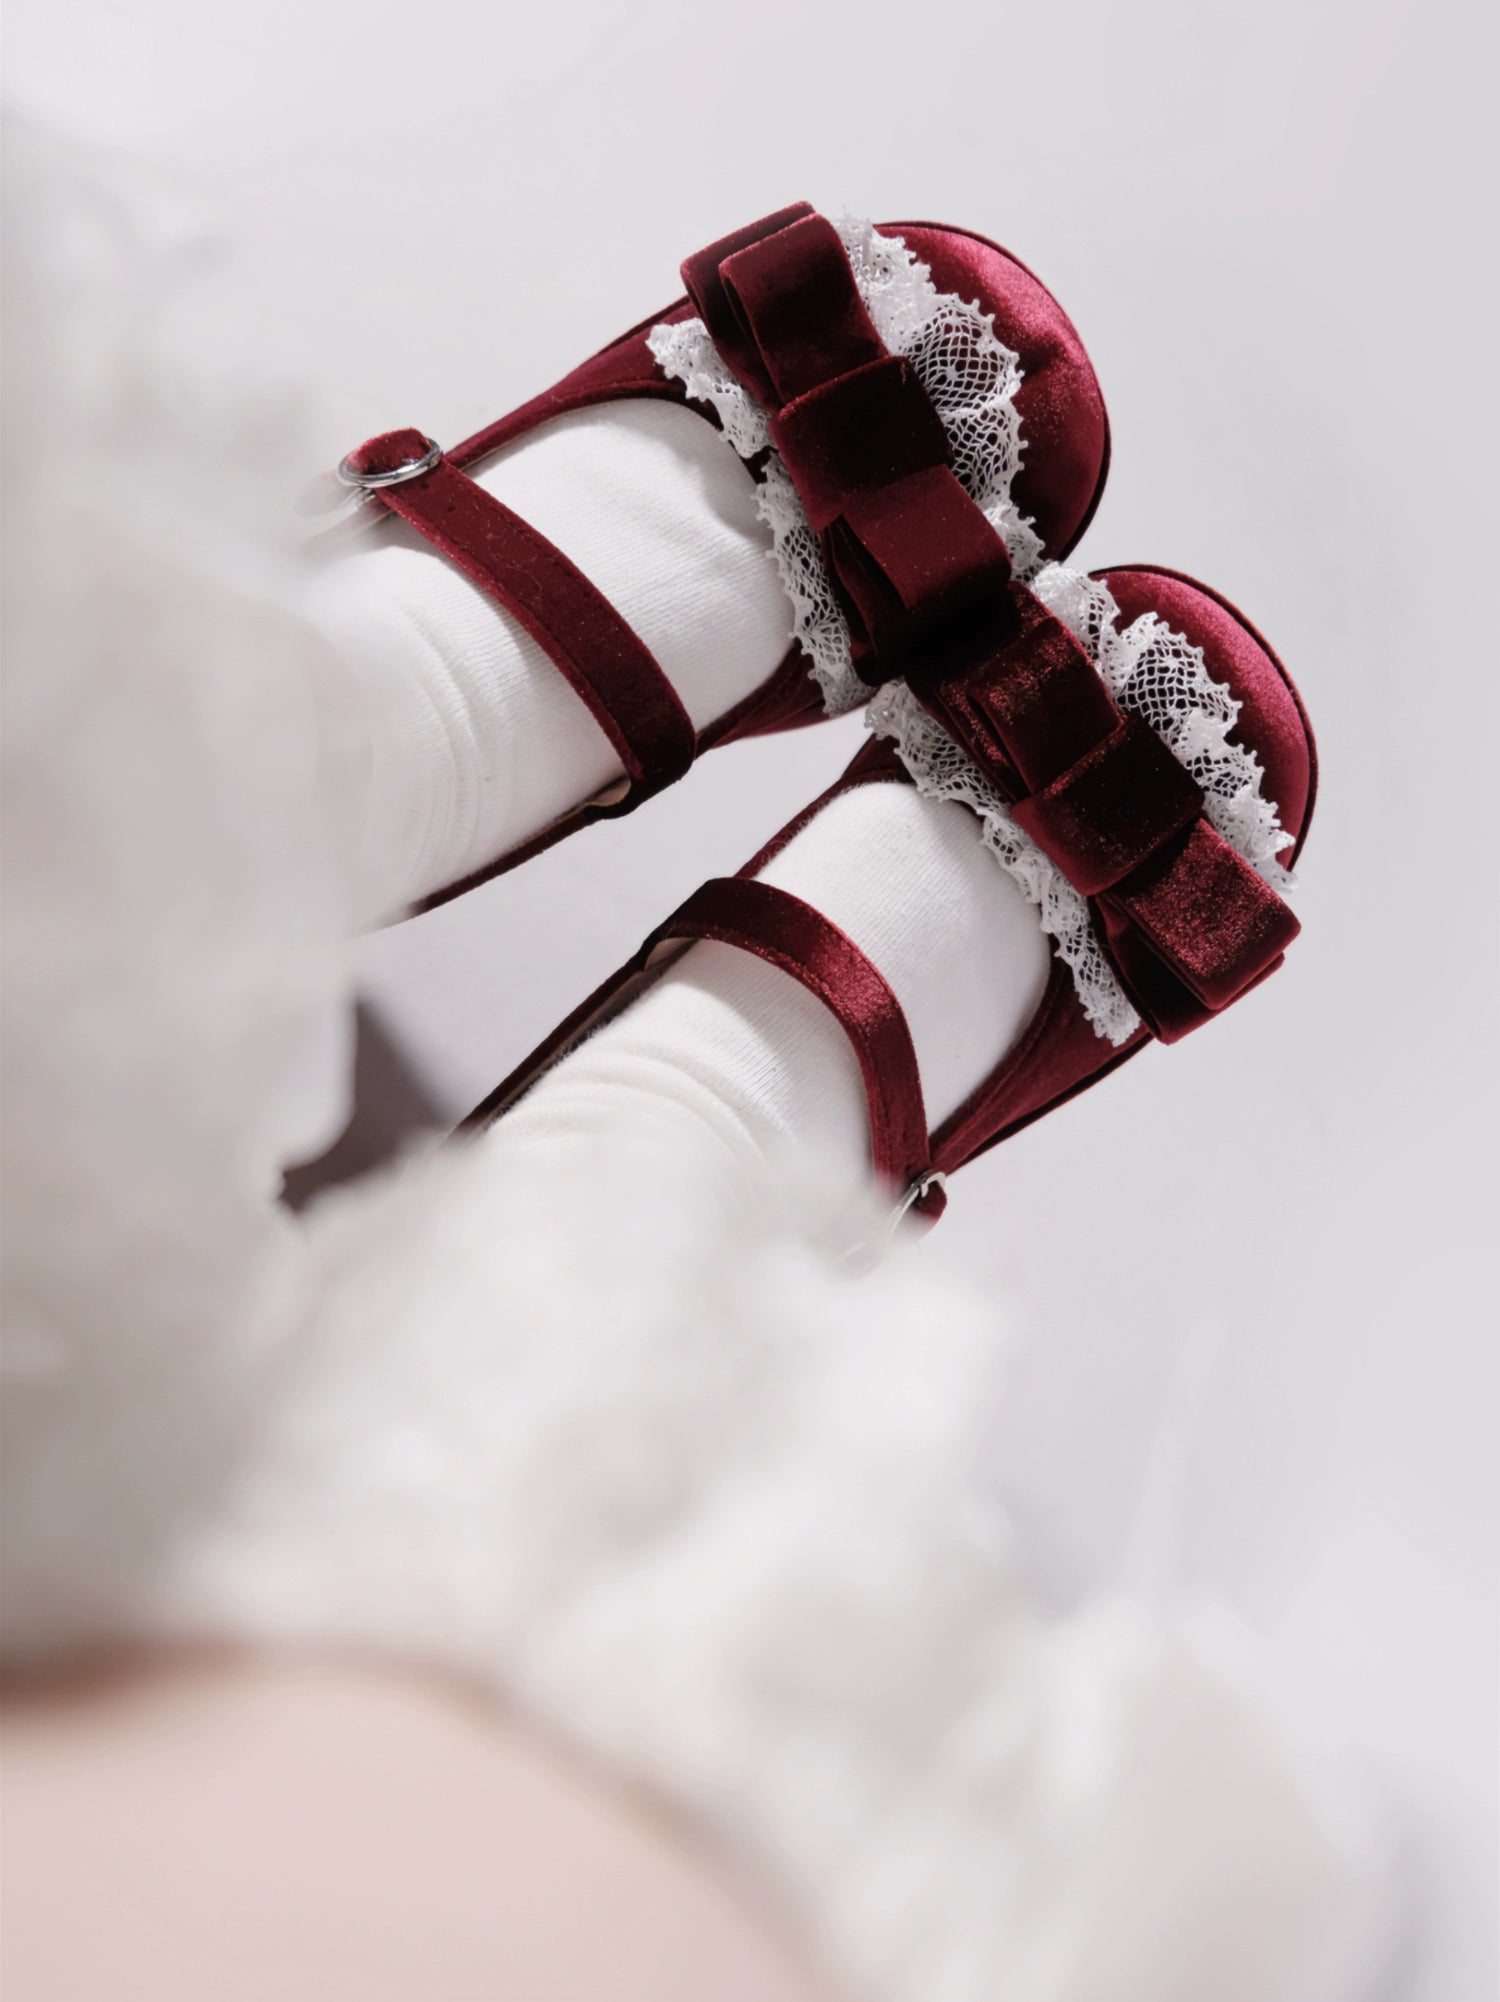 Lolita Shoes Round-Toe Platform Shoes With Velvet Bow 37132:552638